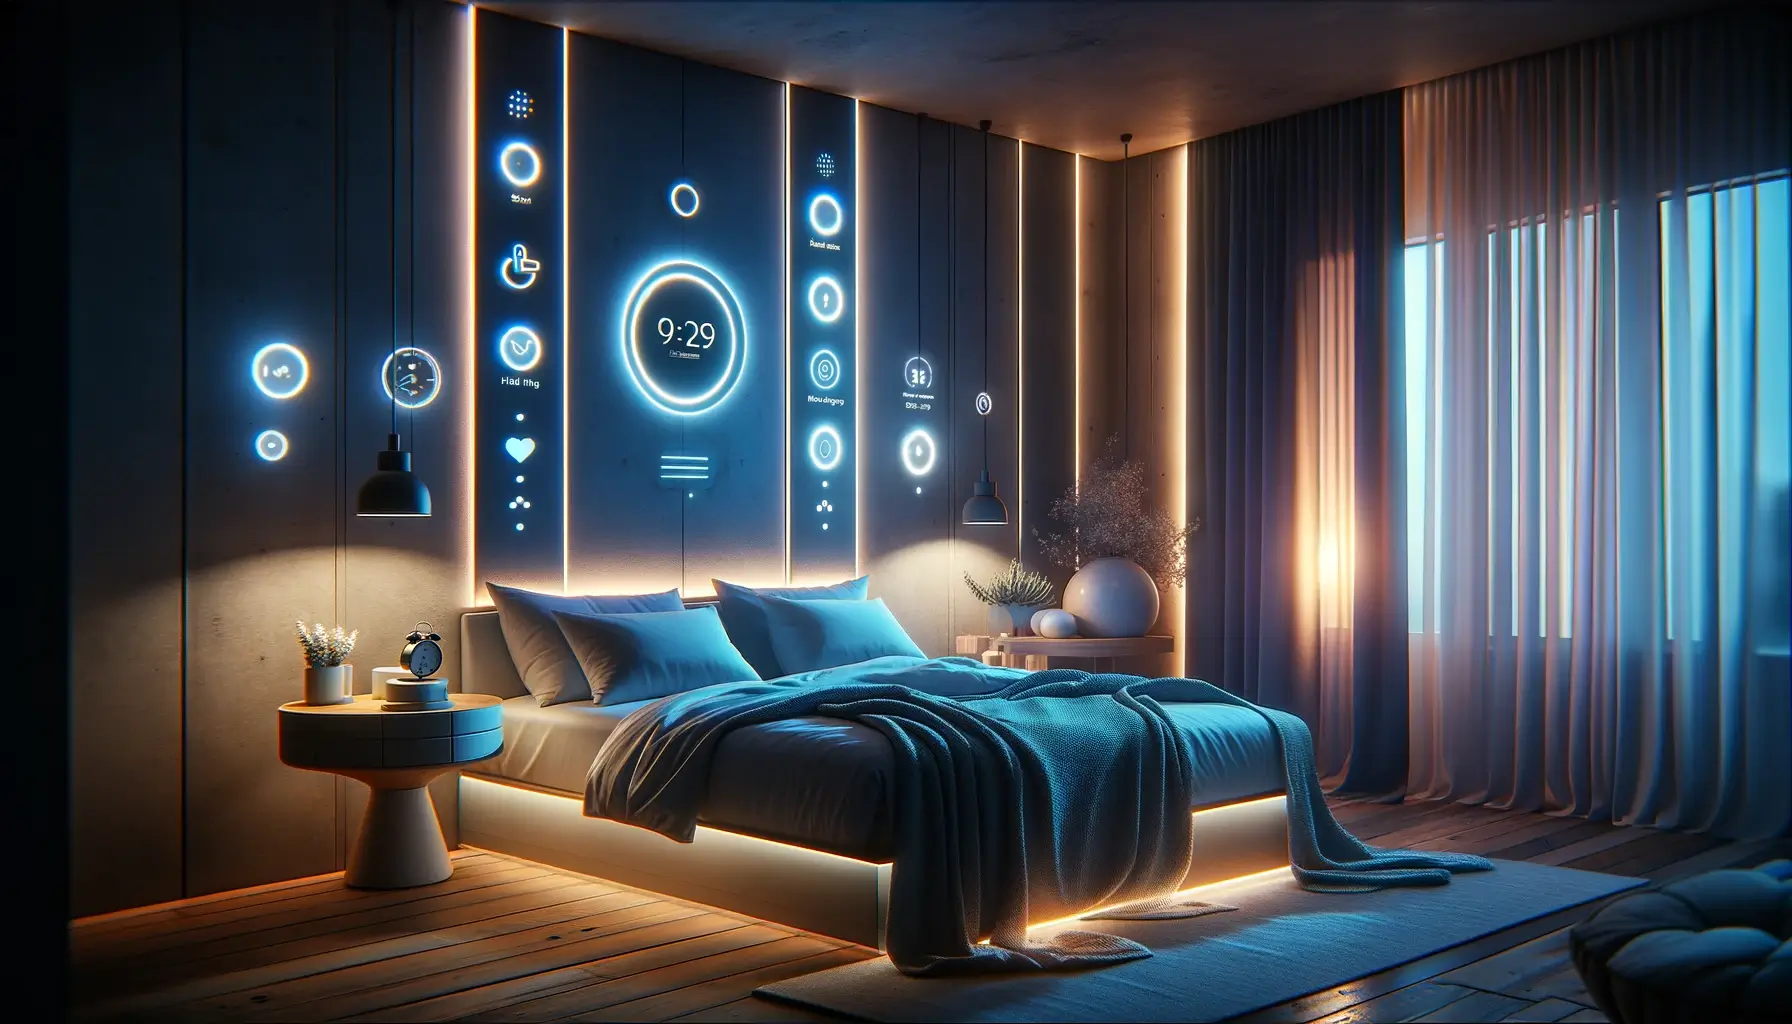 A modern bedroom with smart home technology, featuring a bed with health monitoring functions and ambient wall displays showing time and wellness stats.